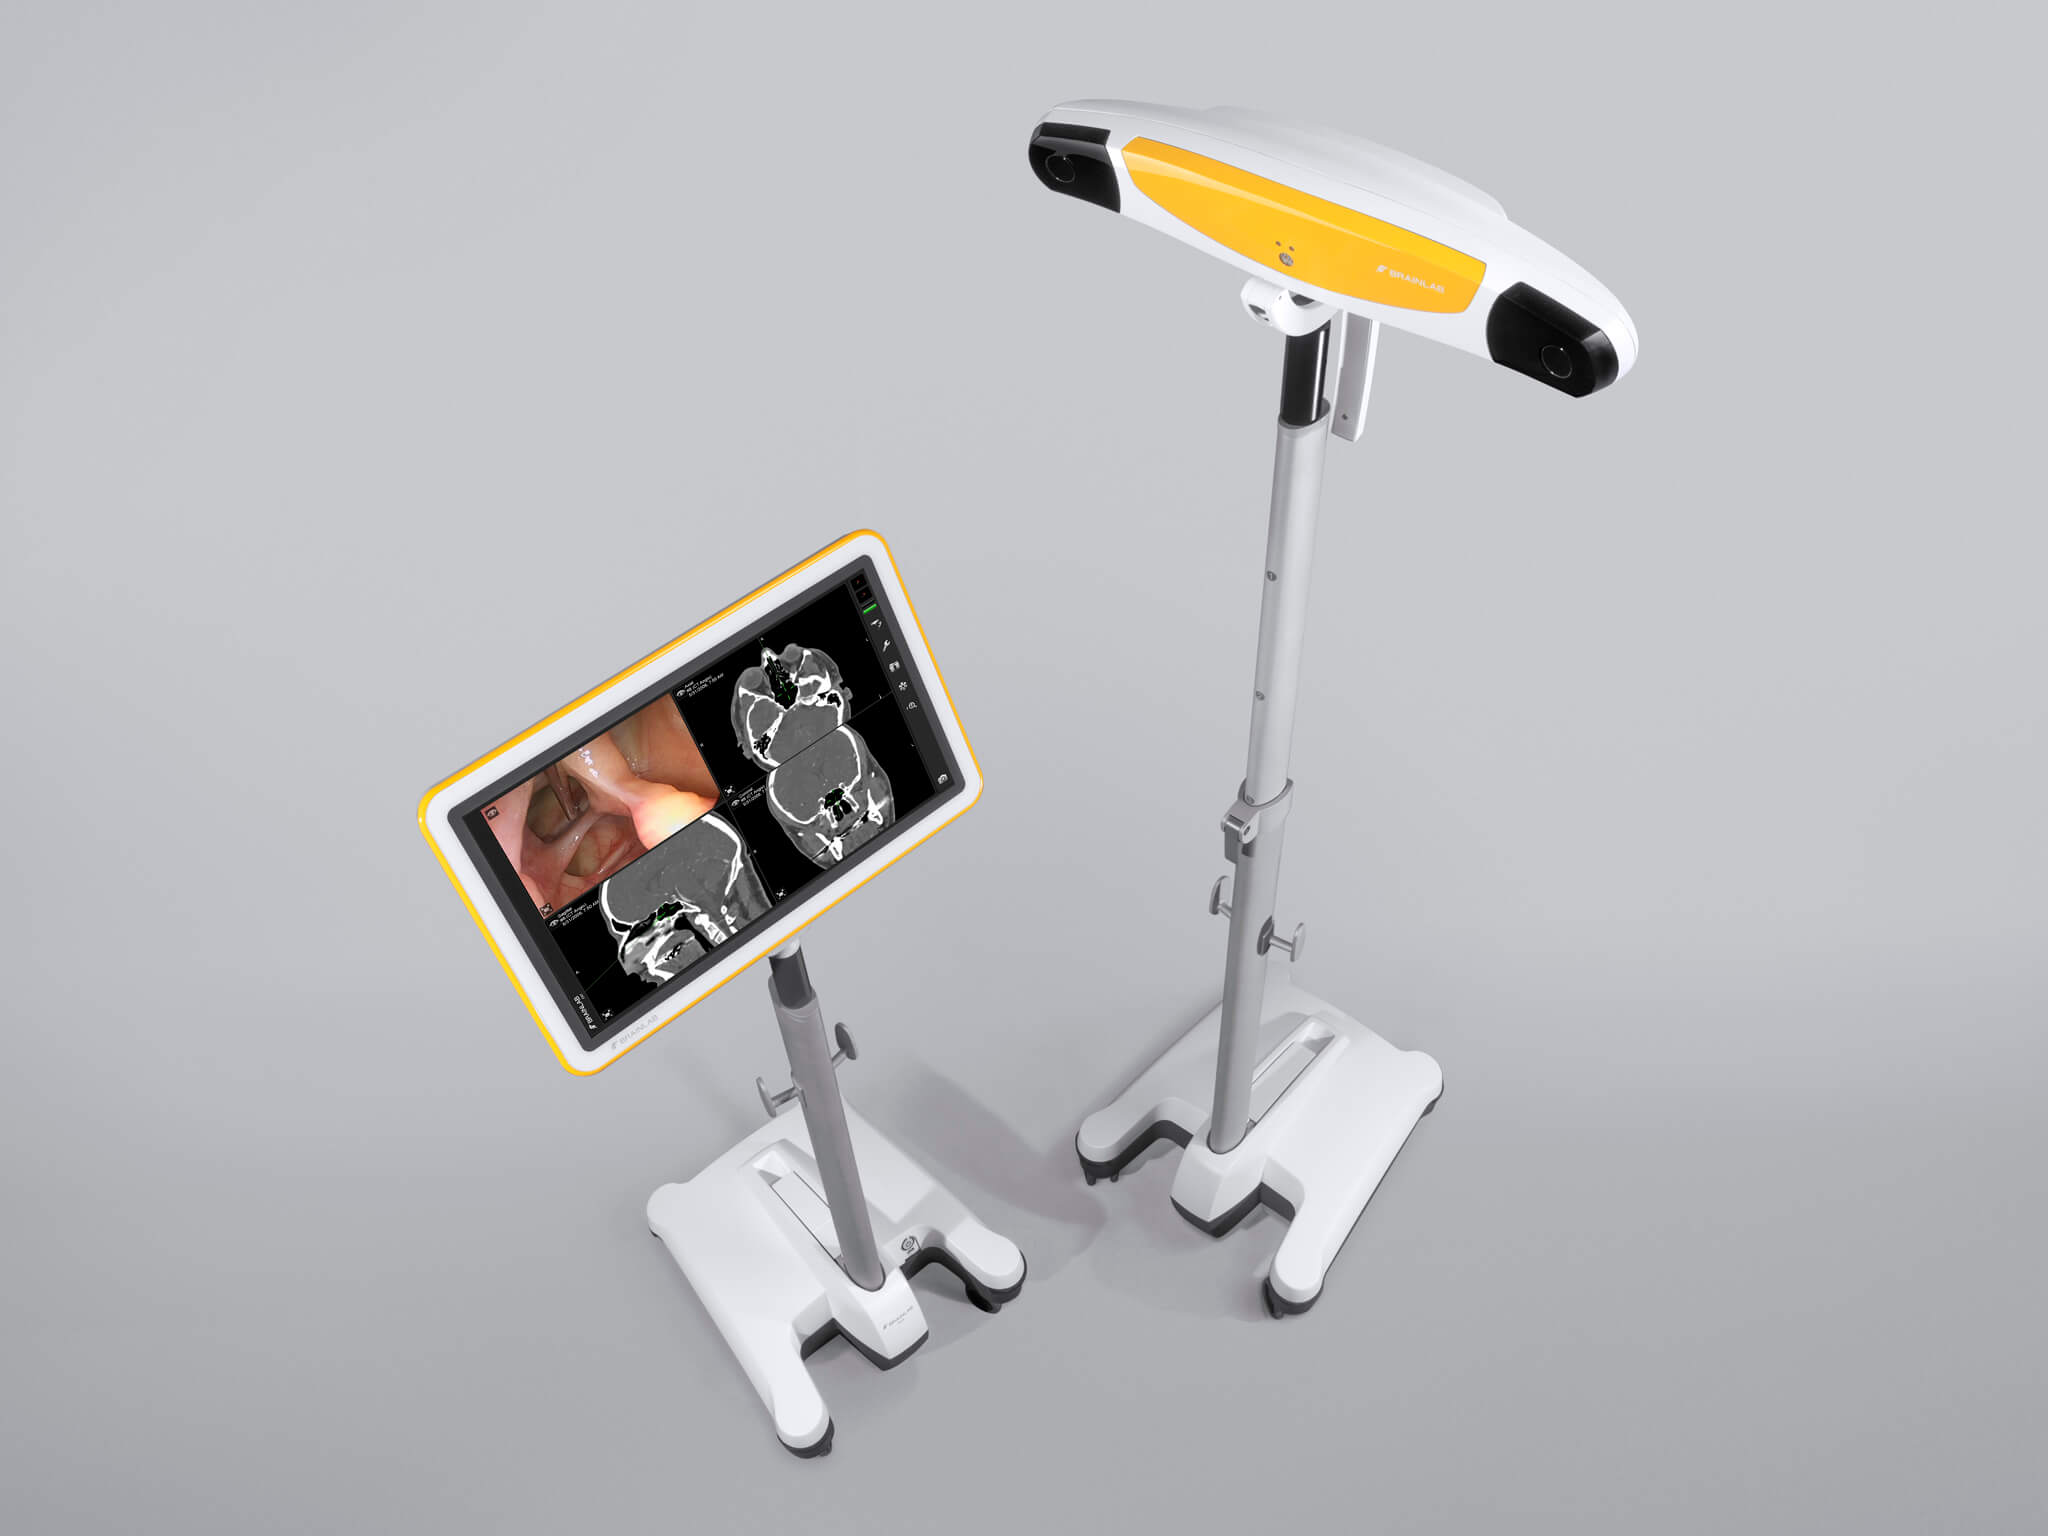 Kick surgical navigation system with separate camera stand